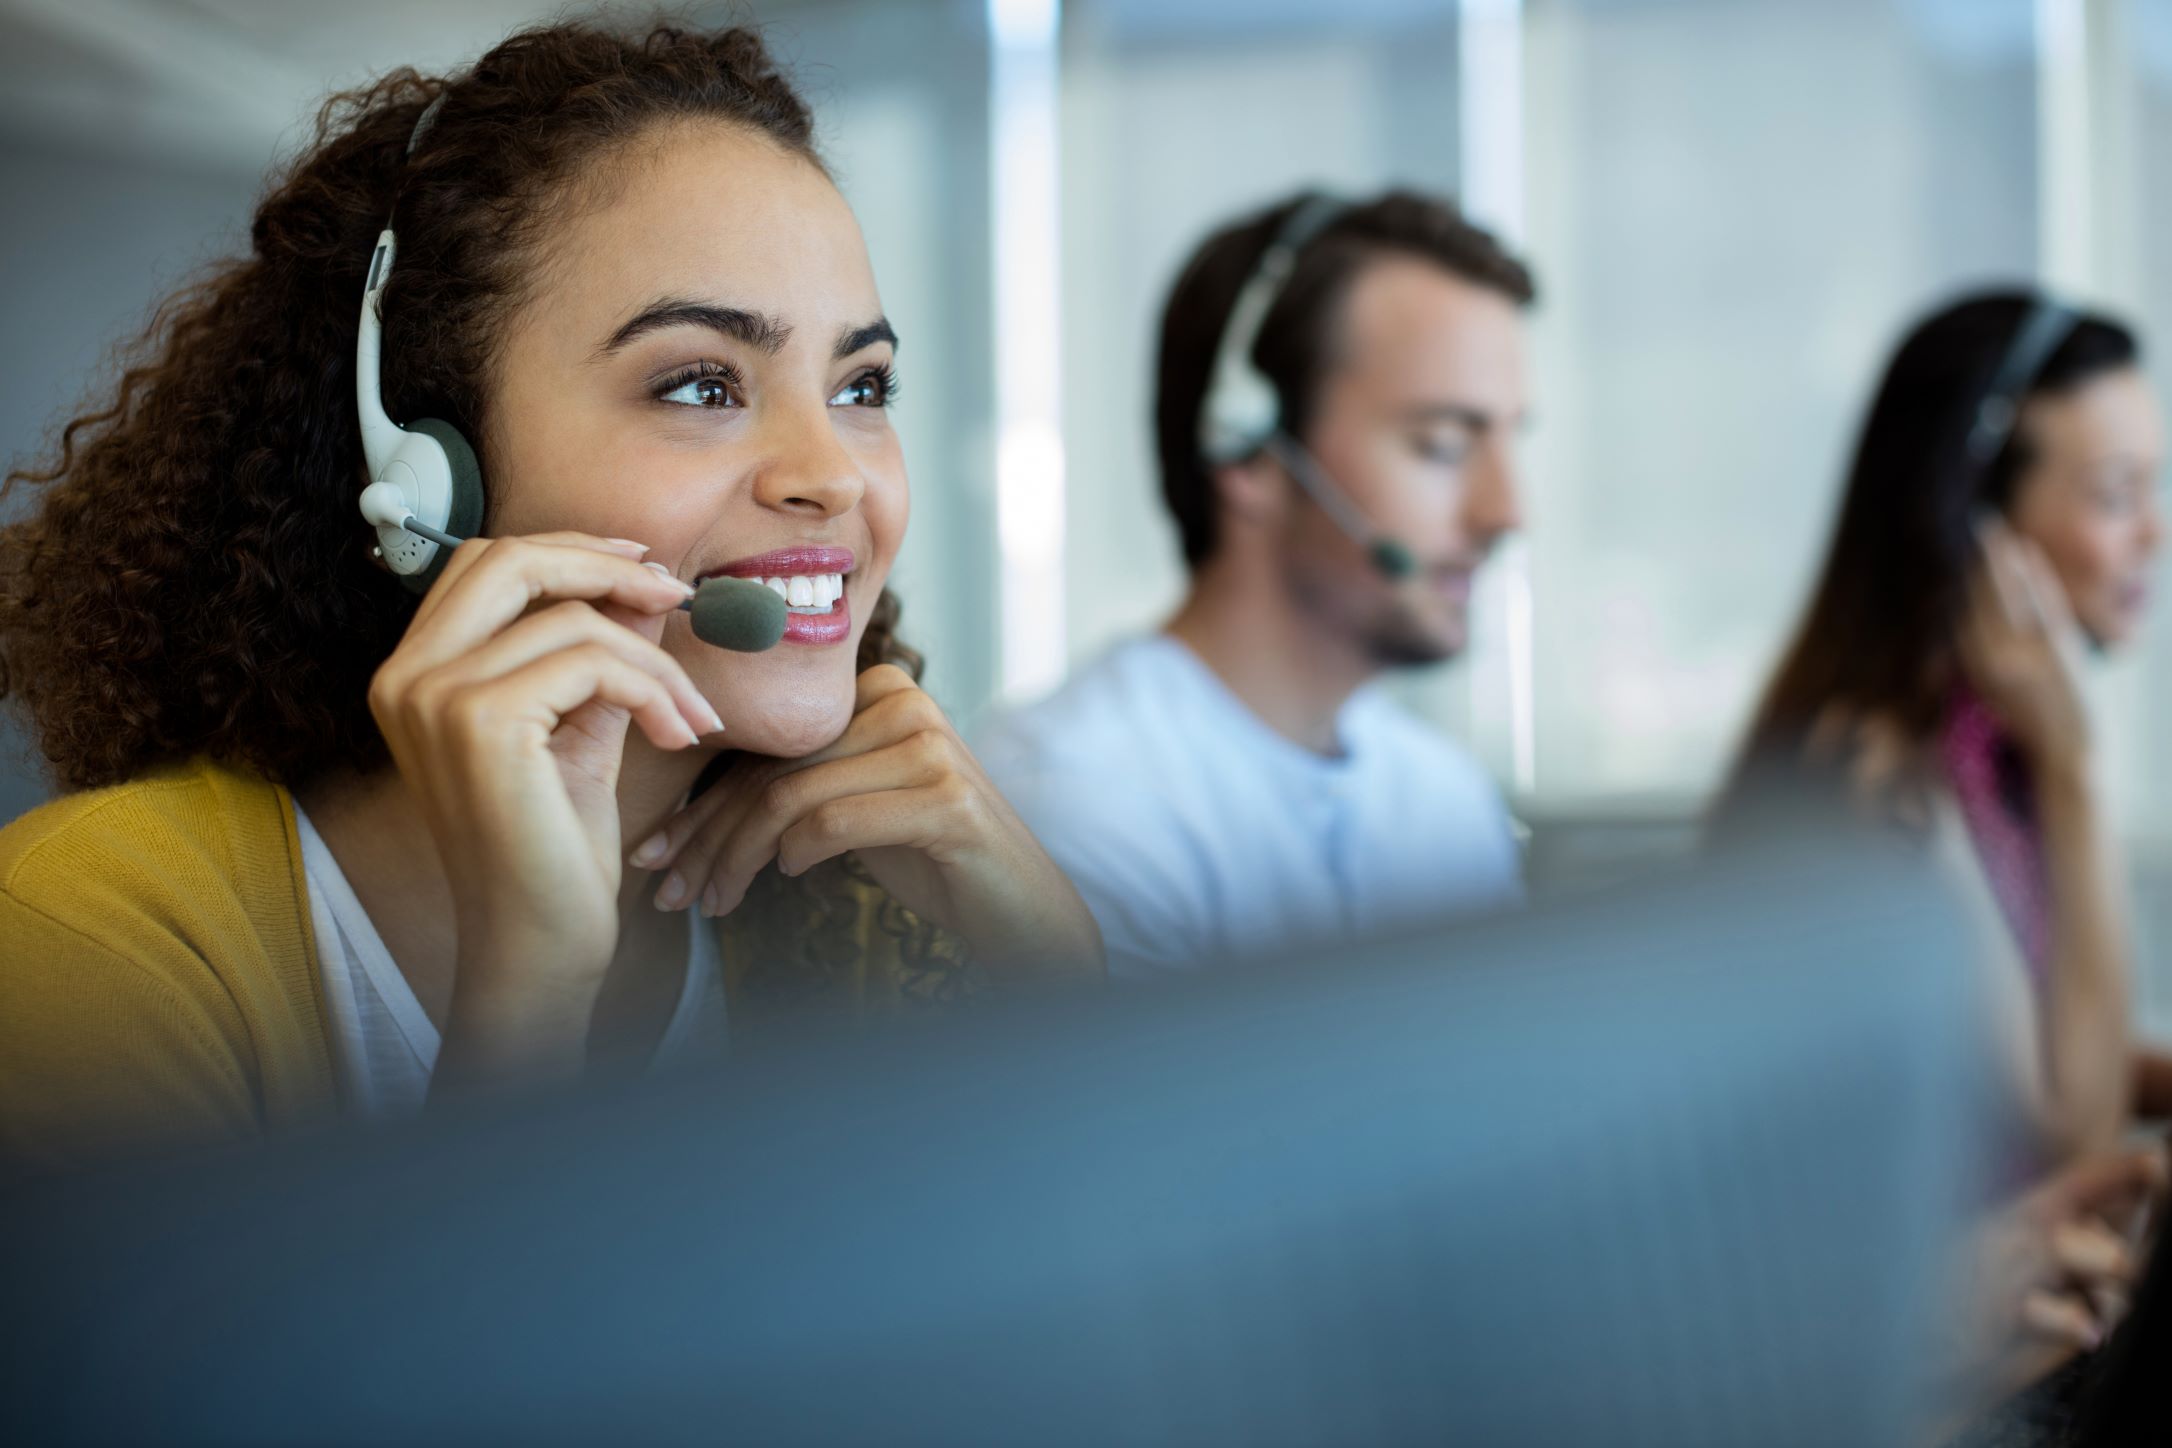 A customer service representative on a headset with two other customer service representatives in the background